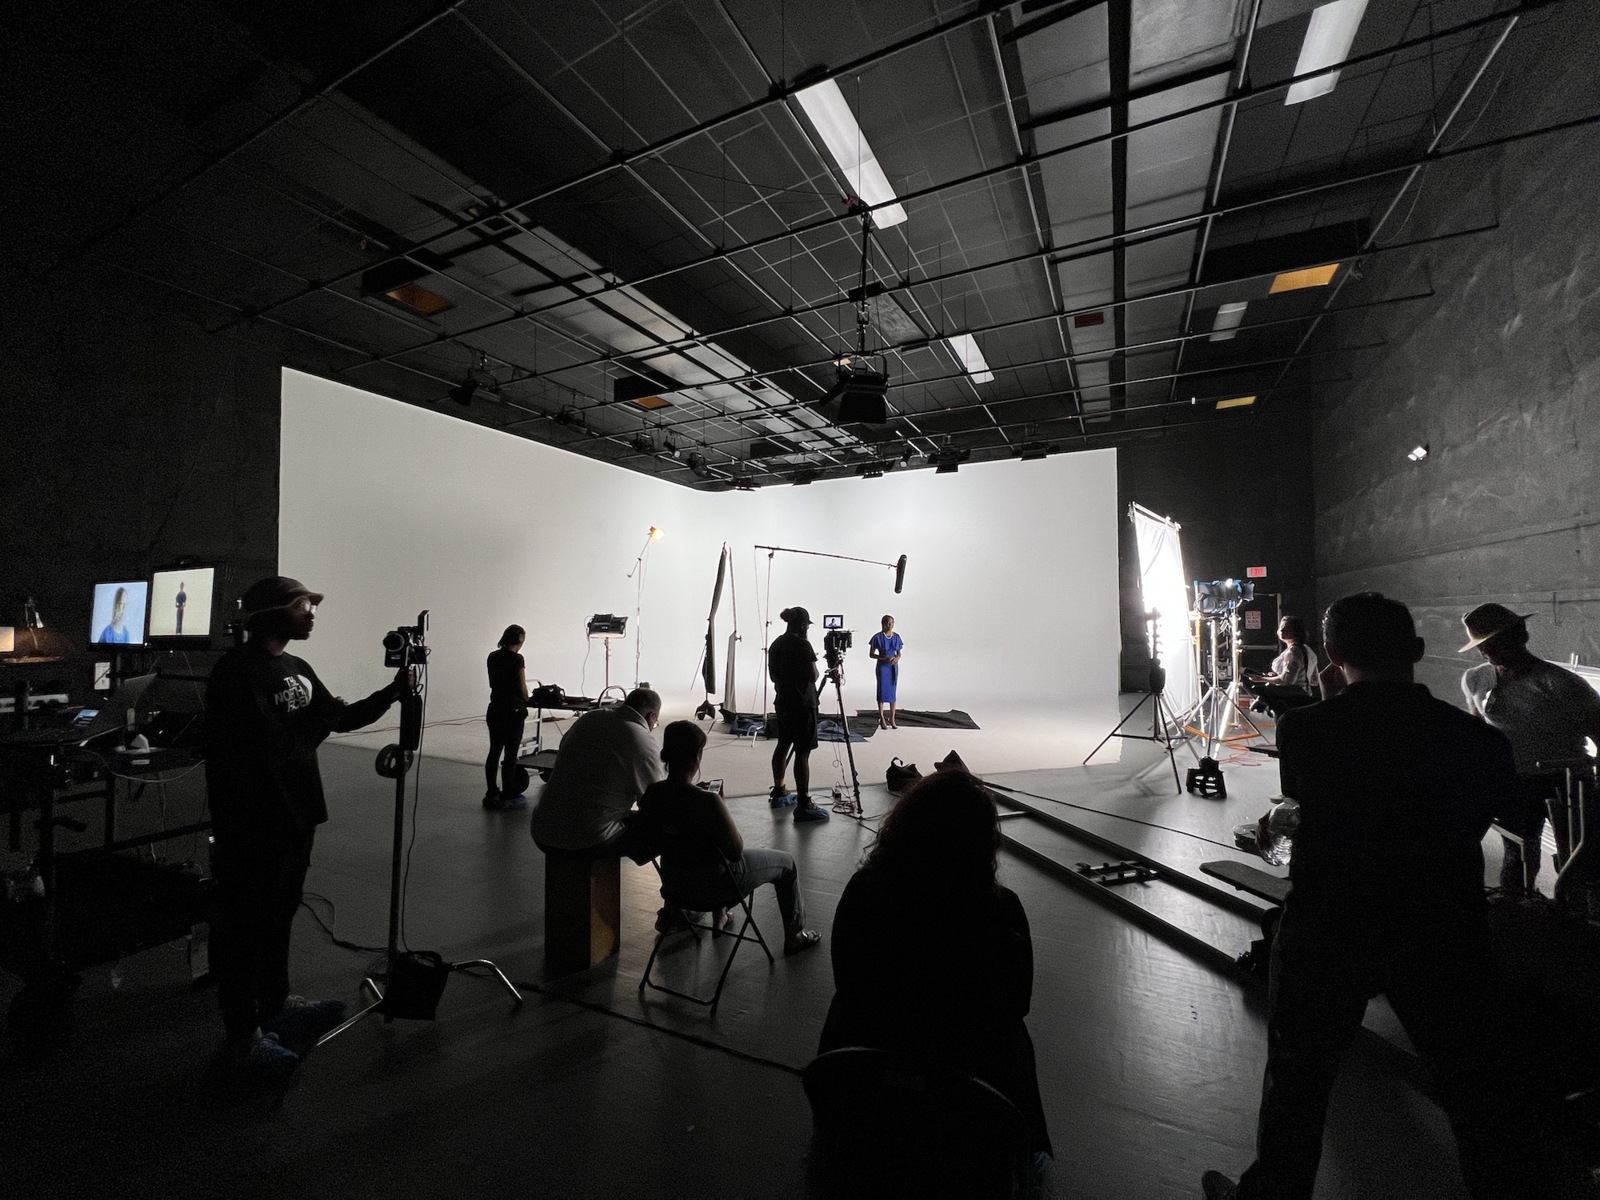 IU C&I Studios Page and Post Outsourcing Video Production Numerous crew members working on set while a woman wearing a blue dress is waiting against a white backdrop